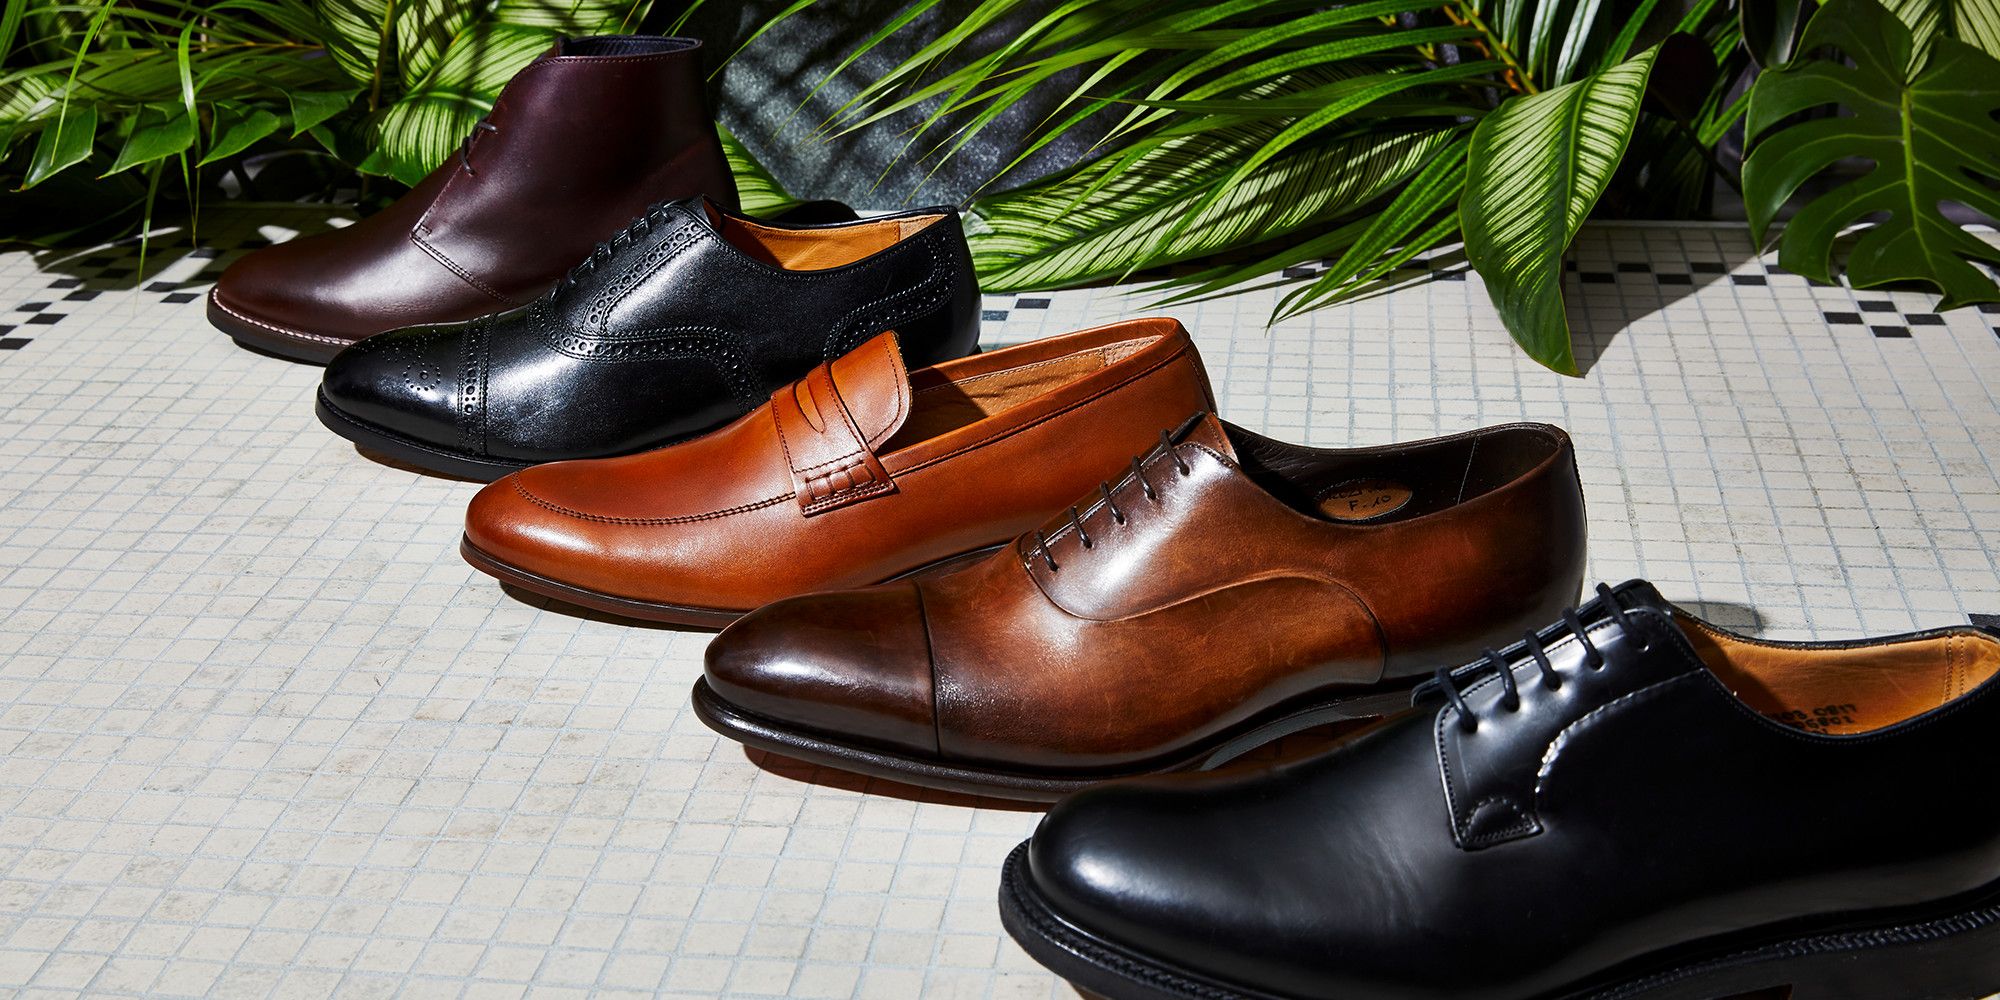 What Are The Best Men's Dress Shoe Brands